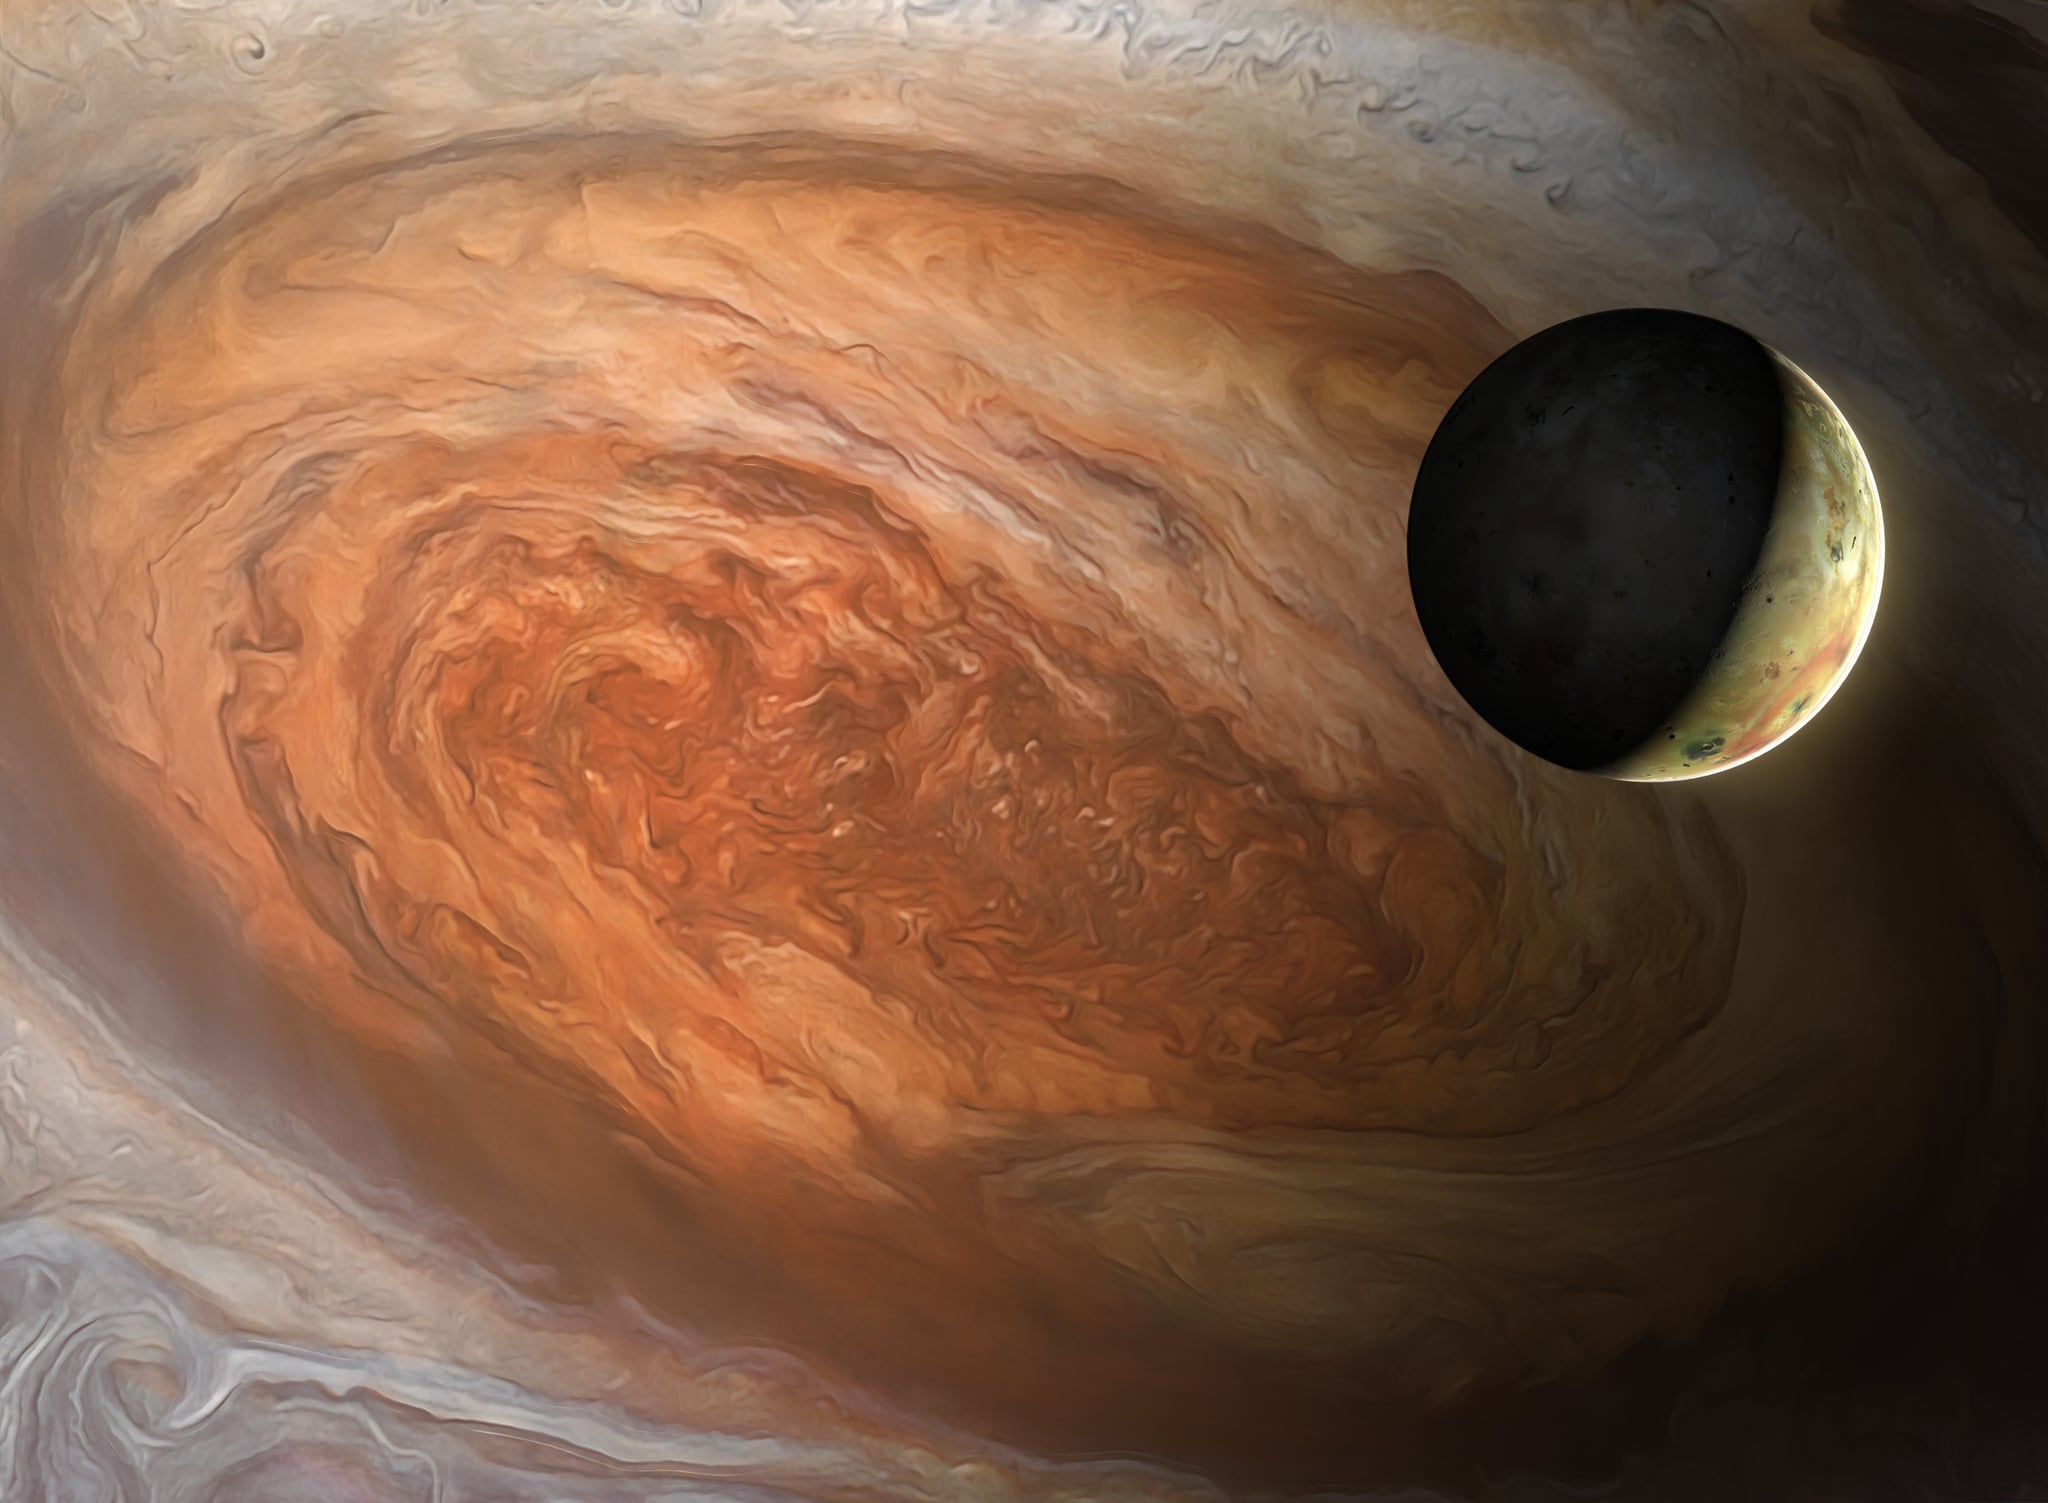 Illustration of the Jovian moon Io, seen against the backdrop of Jupiter's Great Red Spot. The latter is a vast, cyclonic storm - wider than the entire Earth - that has raged for centuries. Io, a highly volcanic world, is the innermost Galilean moon of Jupiter.